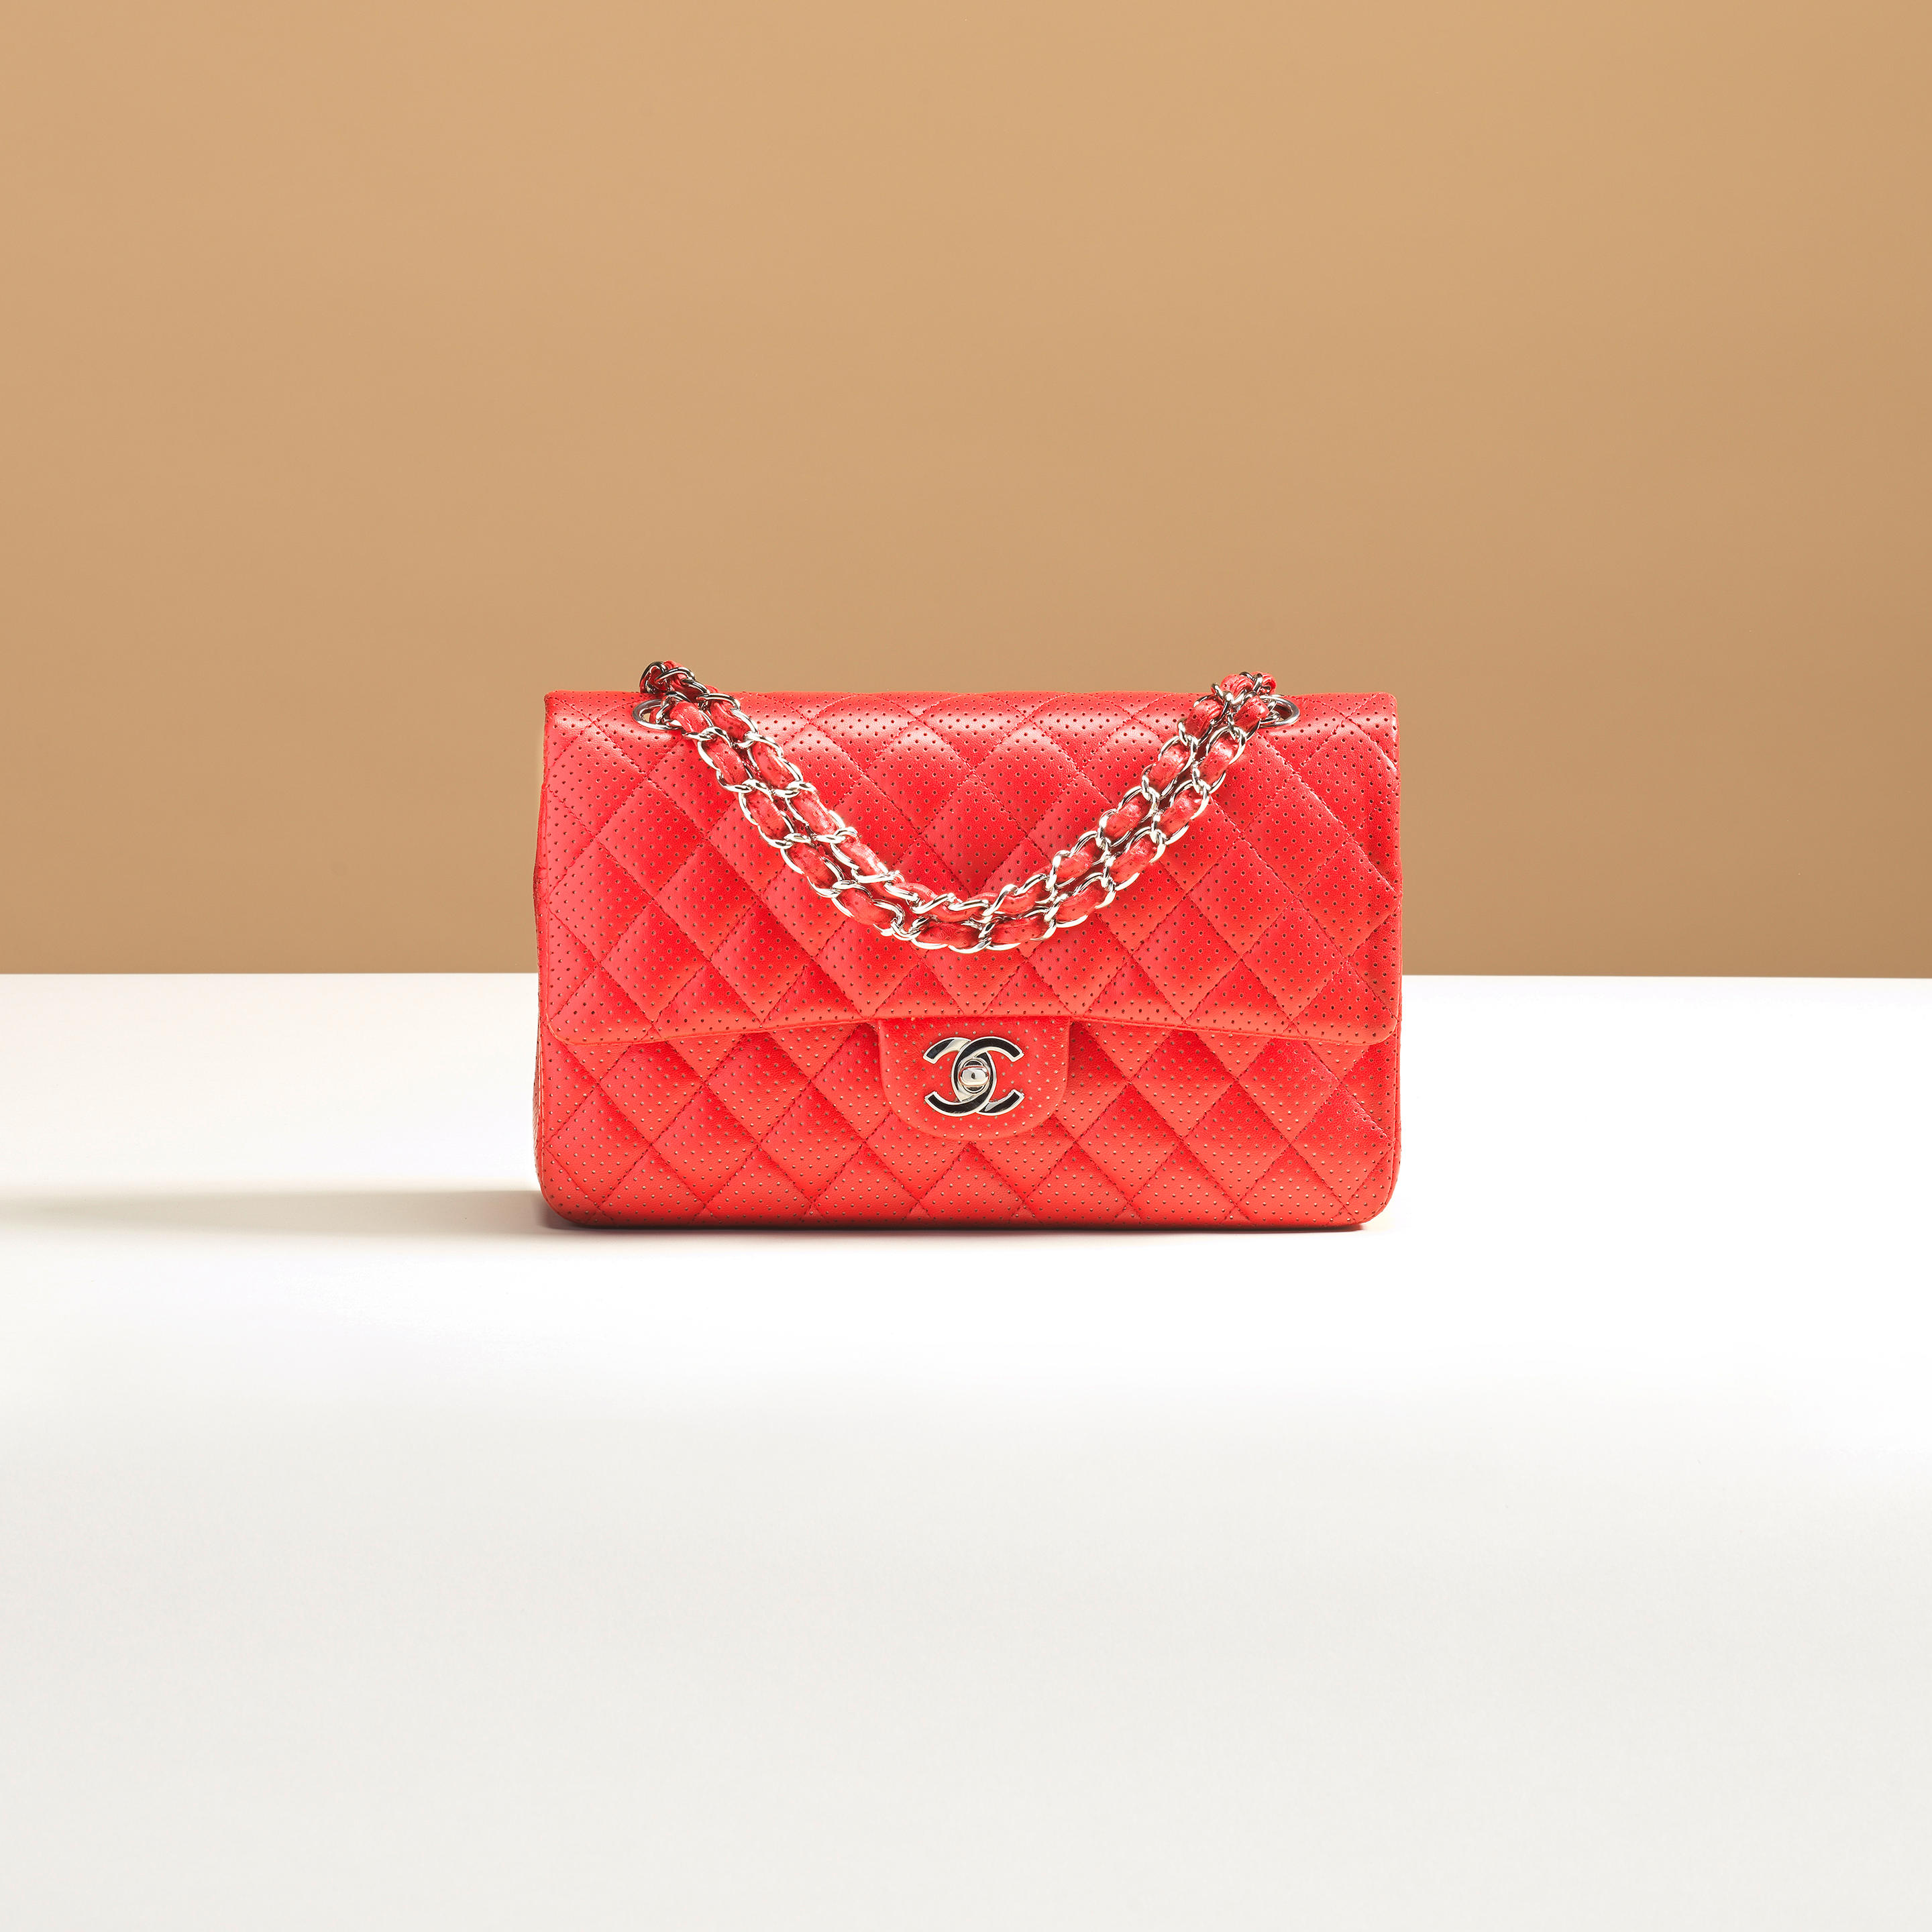 Chanel Red Cross Stitch Lambskin Coco Handle Bag Mini Auction